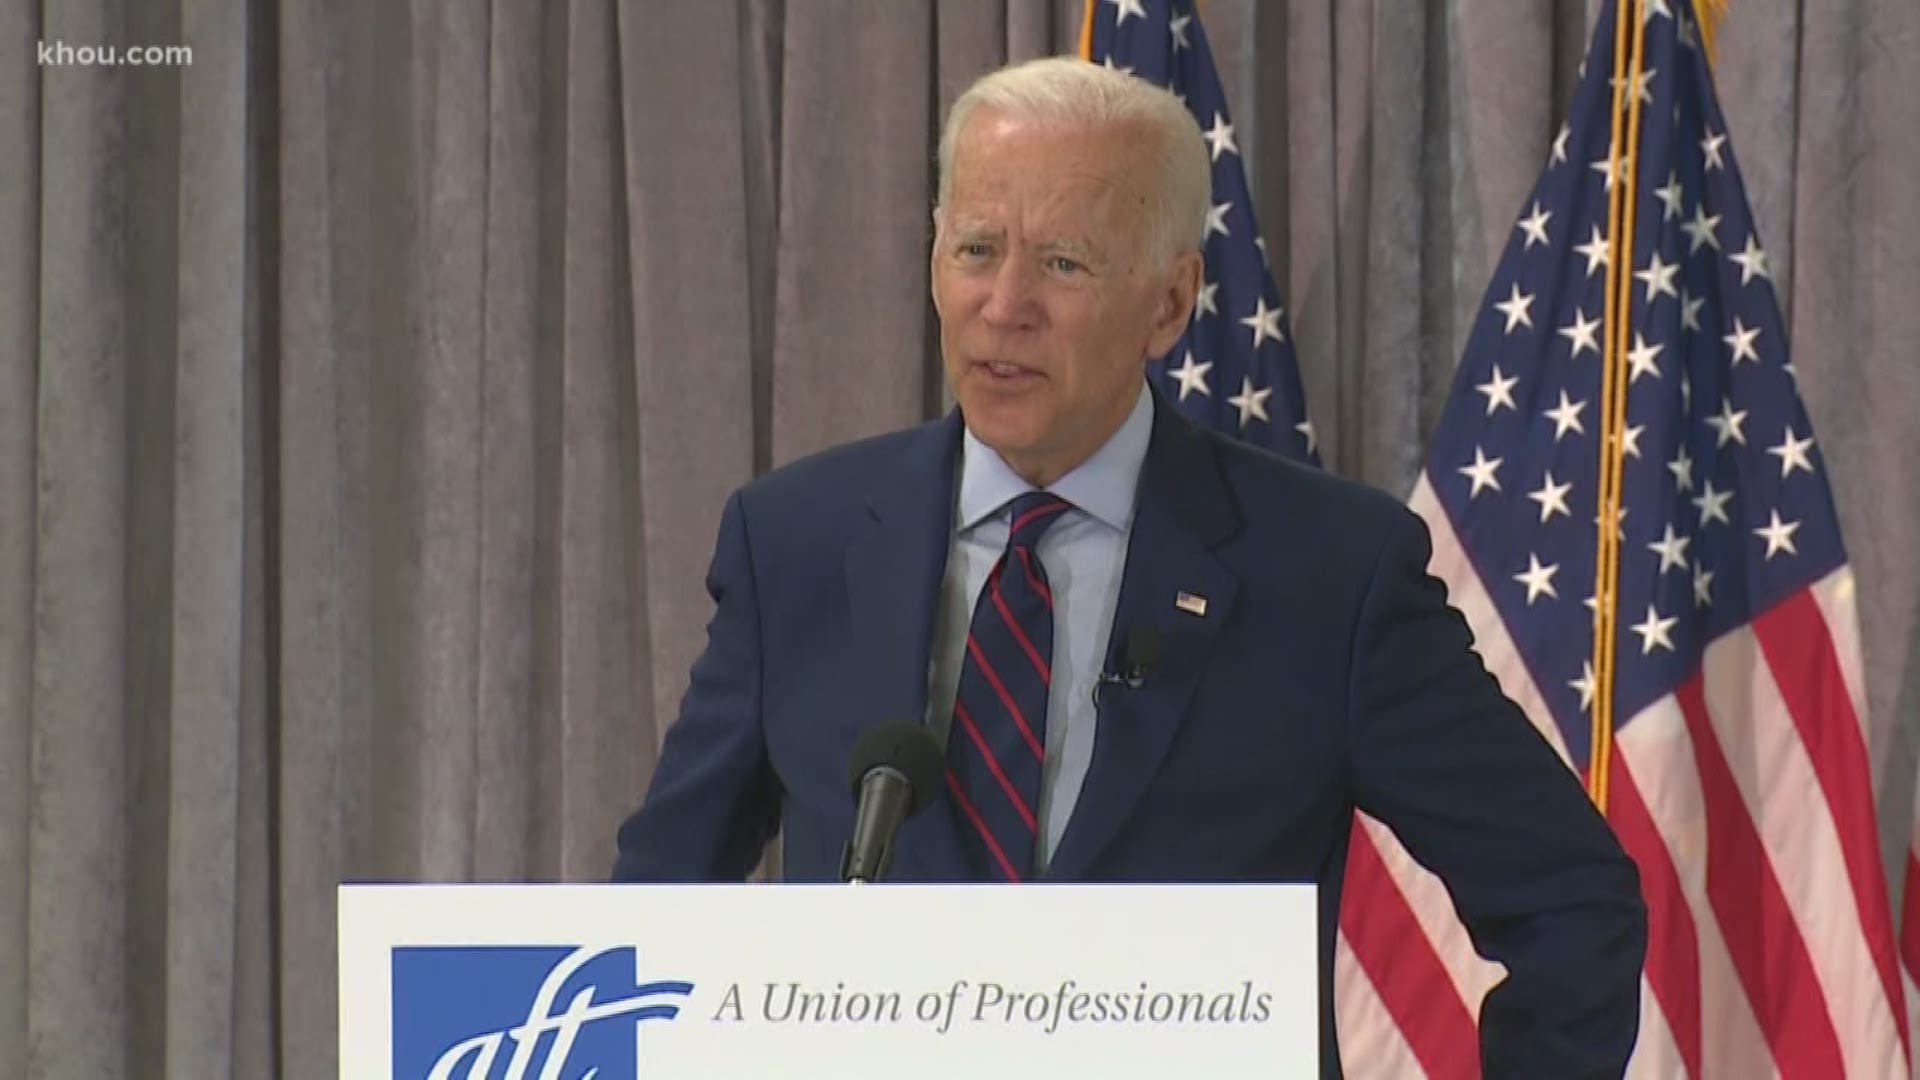 Democratic presidential candidate Joe Biden made his first stop in Texas Tuesday as a 2020 presidential candidate.